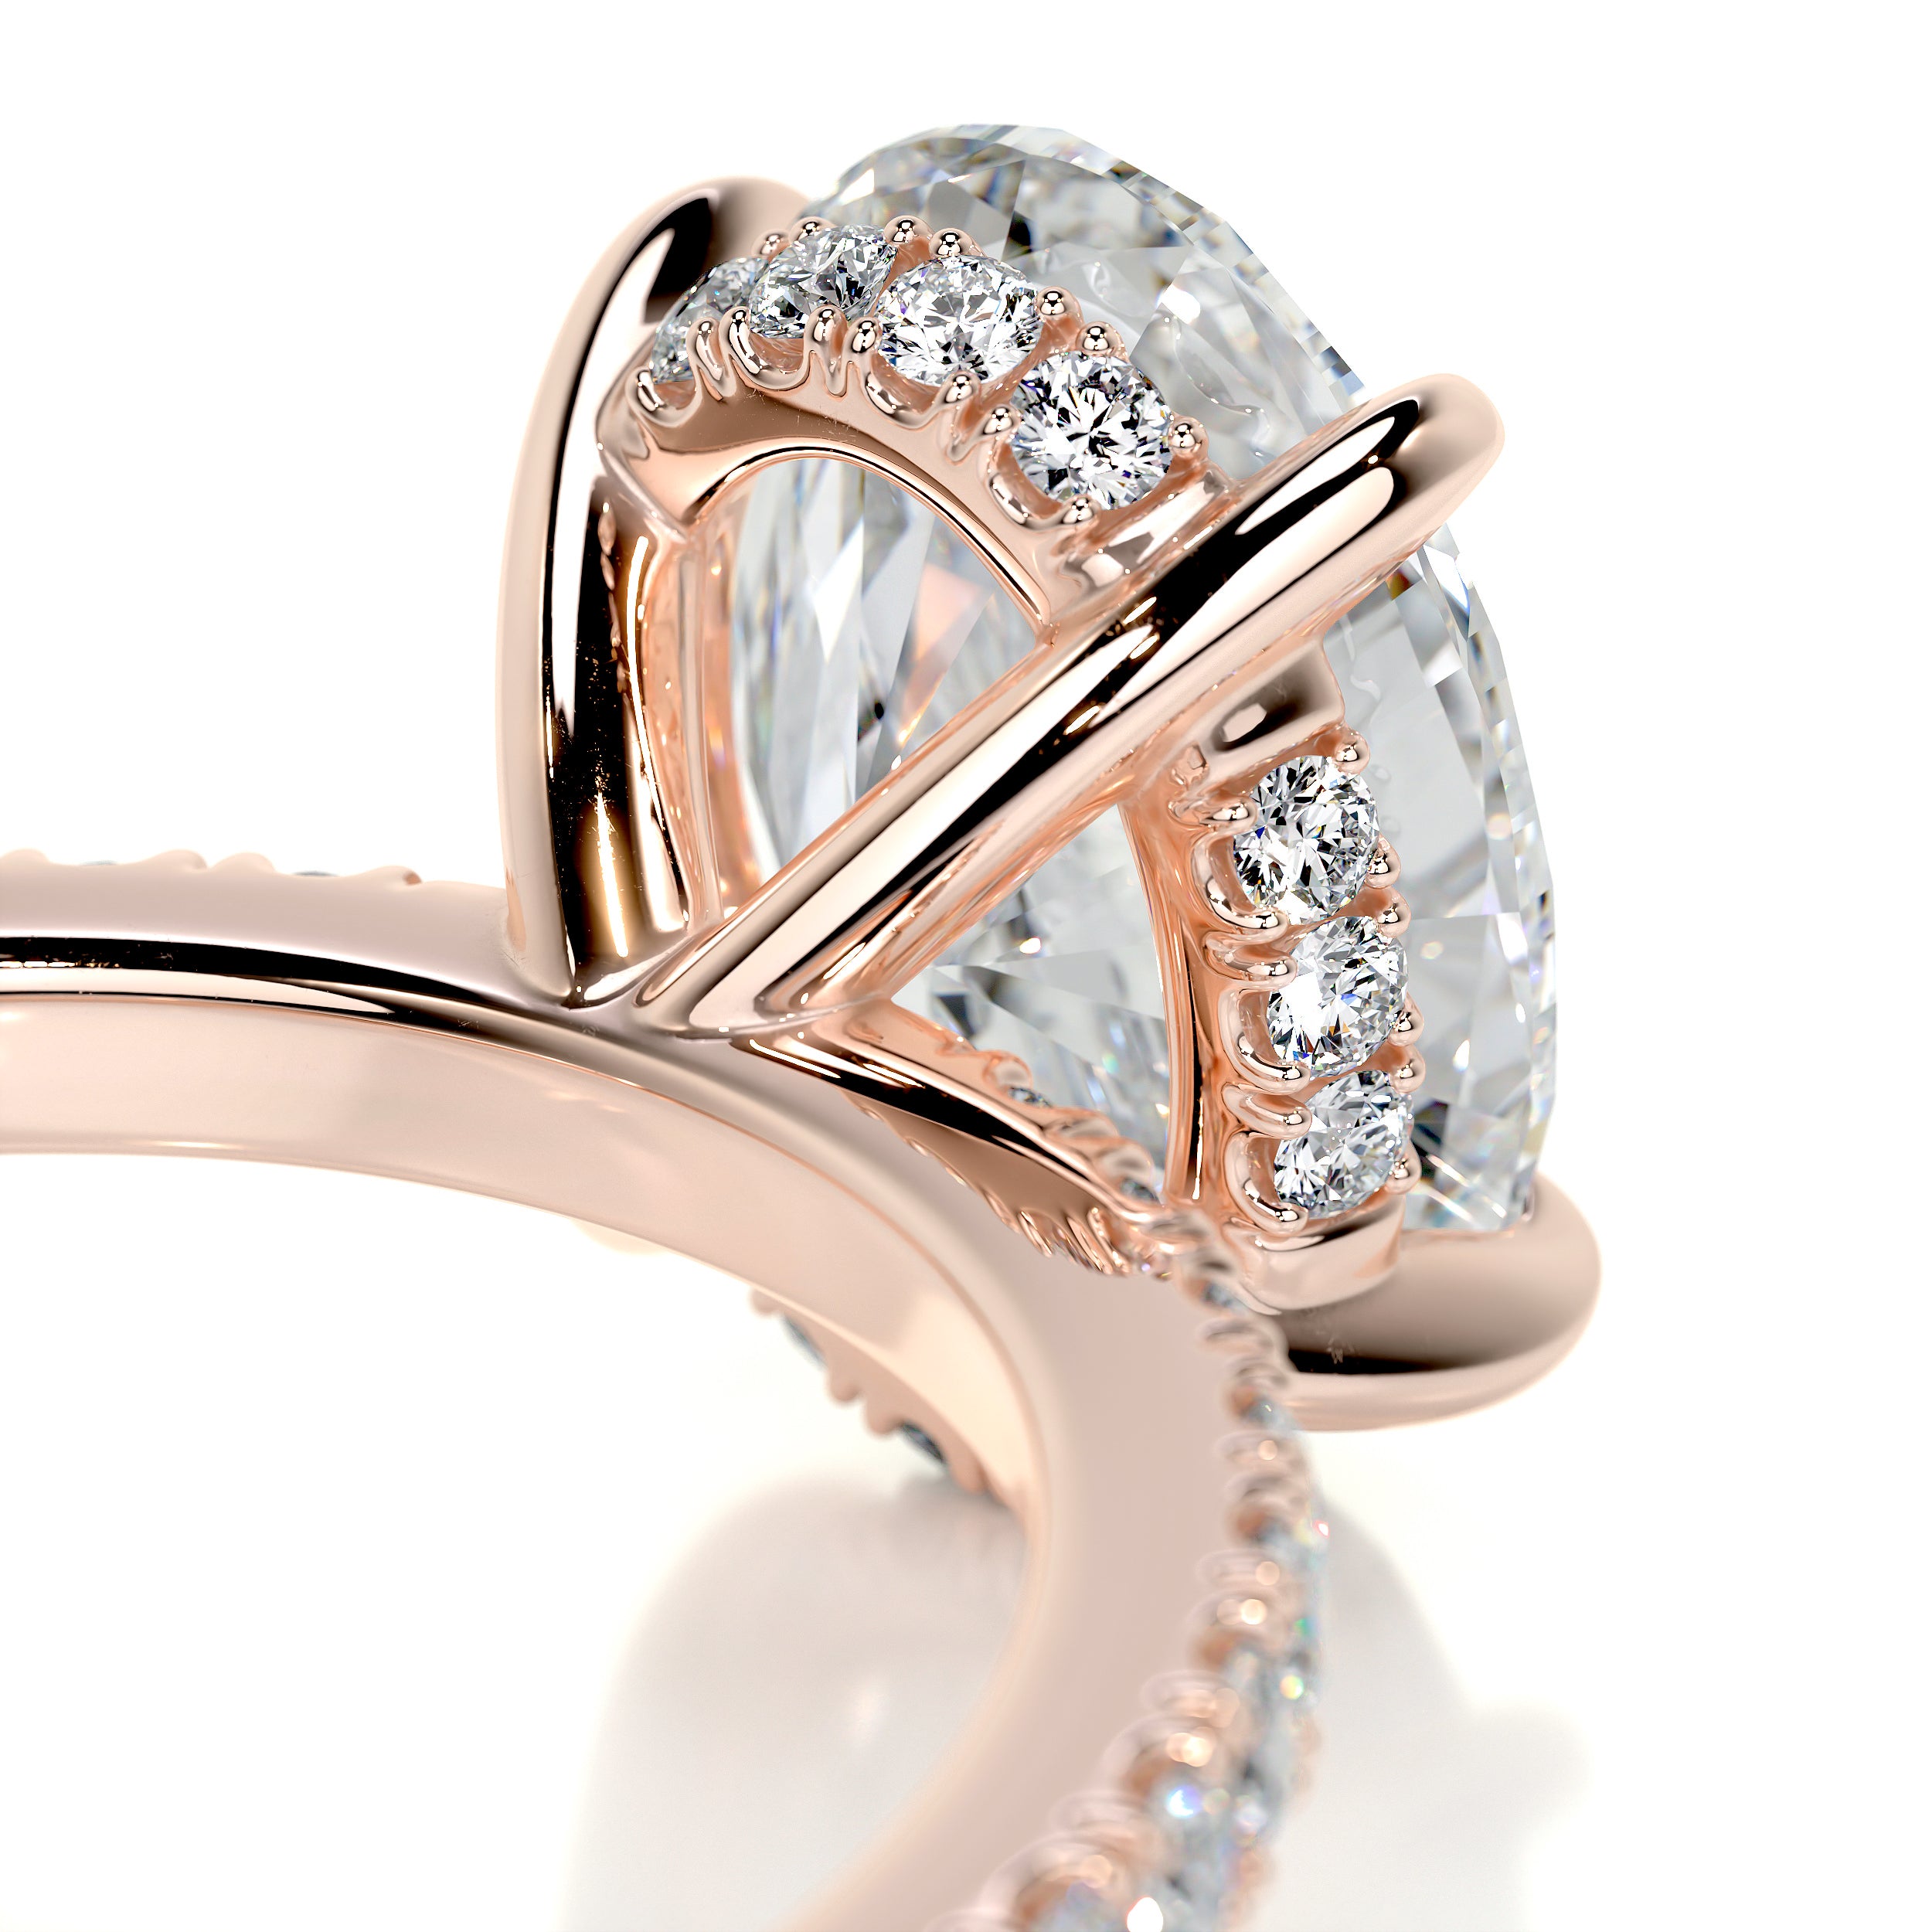 Lucy Diamond Engagement Ring -14K Rose Gold